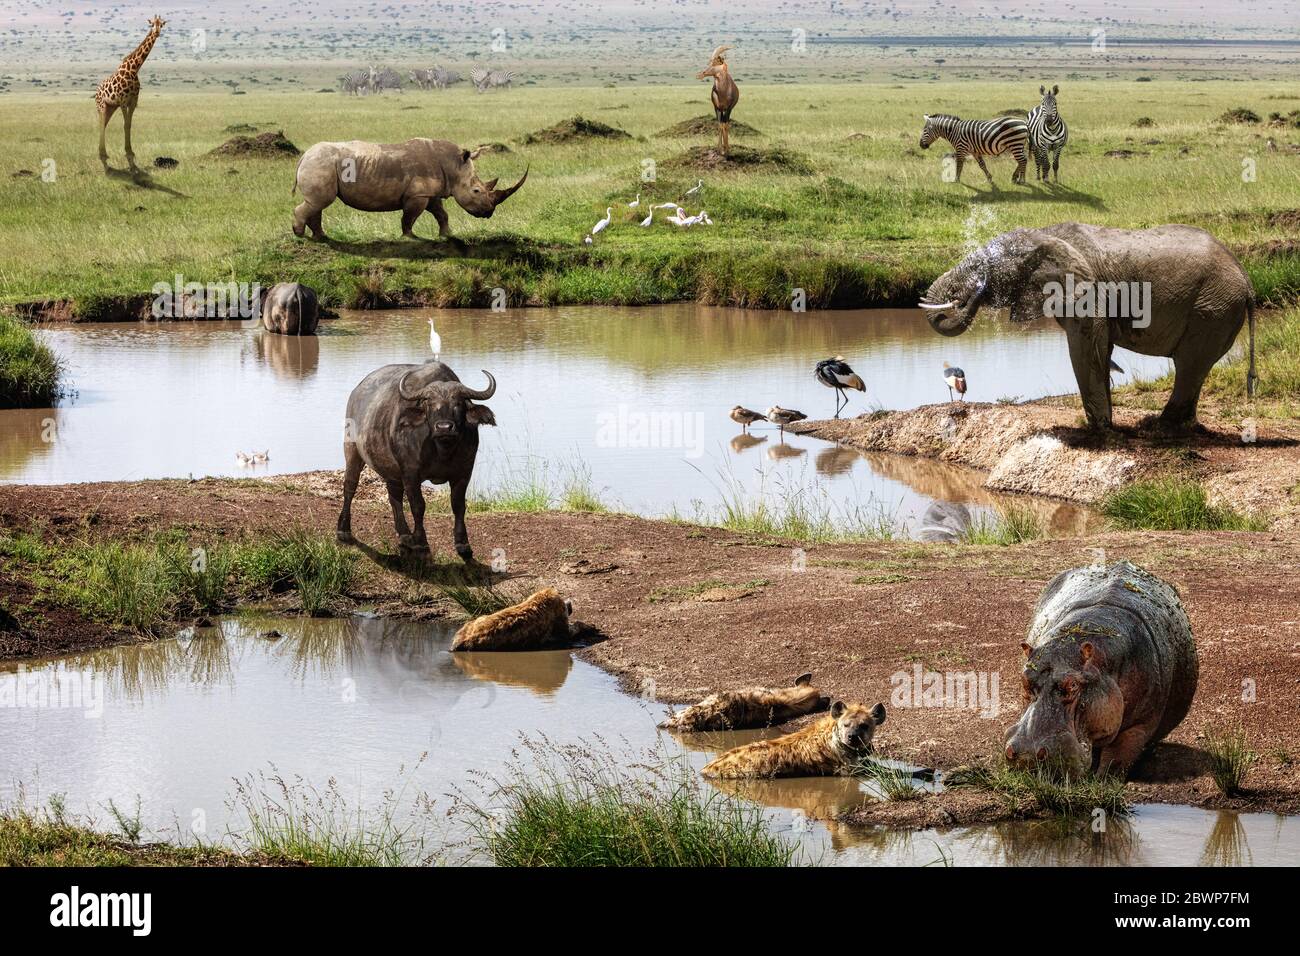 Kenya Africa safari scene with a large group of various wildlife animals around a watering hole Stock Photo